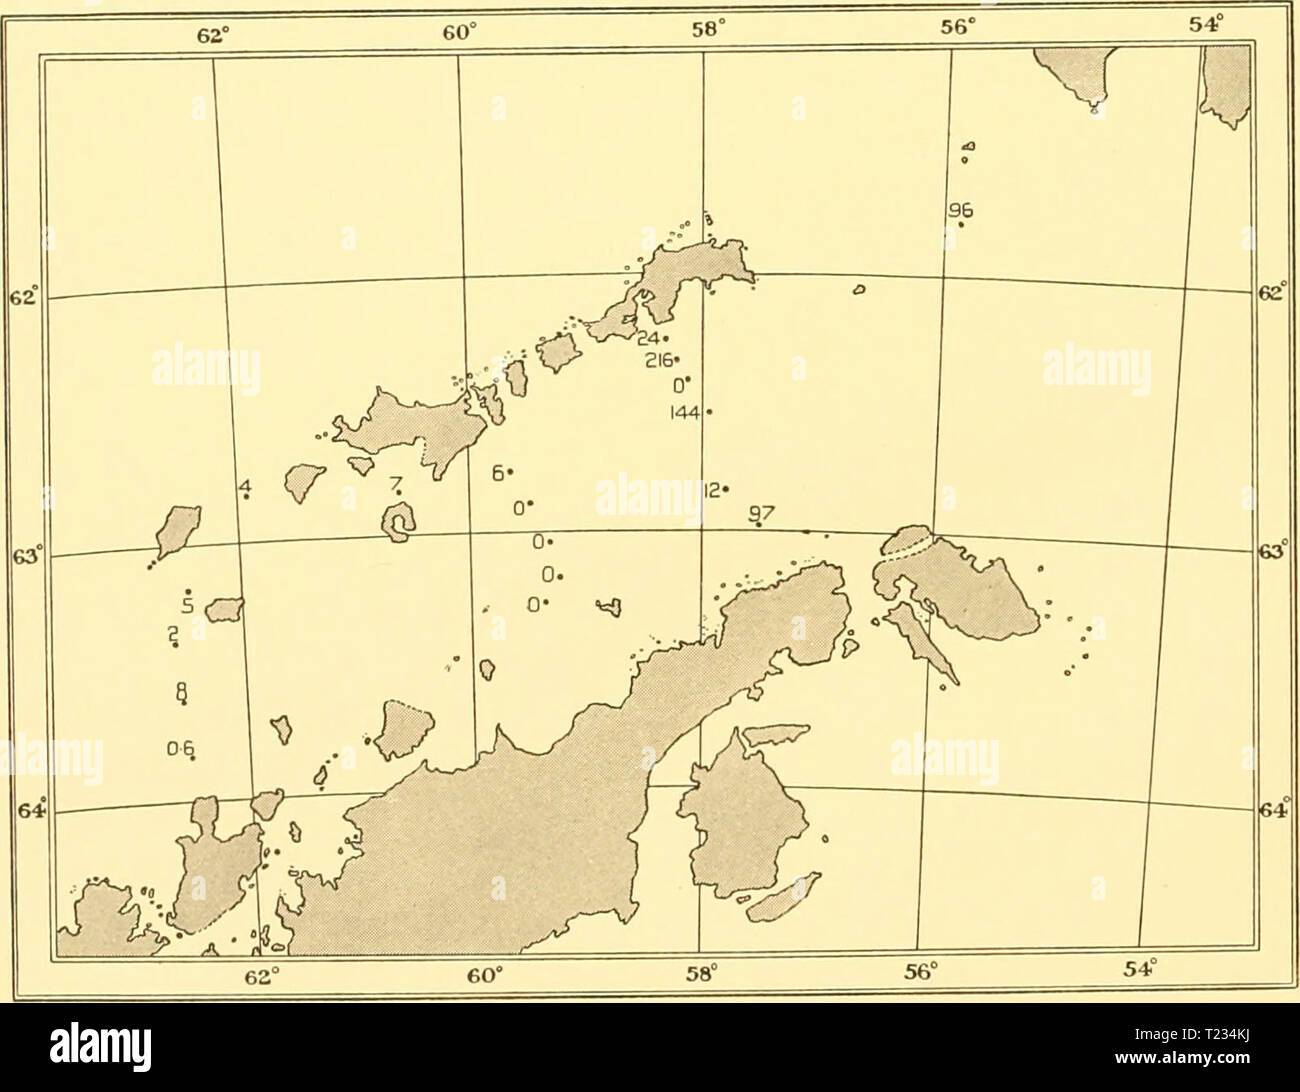 Archive image from page 131 of Discovery reports (1934) Discovery reports  discoveryreports08inst Year: 1934  Fig. 59. The distribution of Rhisosolenia alata f. gracillima in Bransfield Strait, November i I = one thousand. 929.    Fig. 60. The distribution of Biddulphia striata in Bransfield Strait, November 1929. I = one thousand. Stock Photo